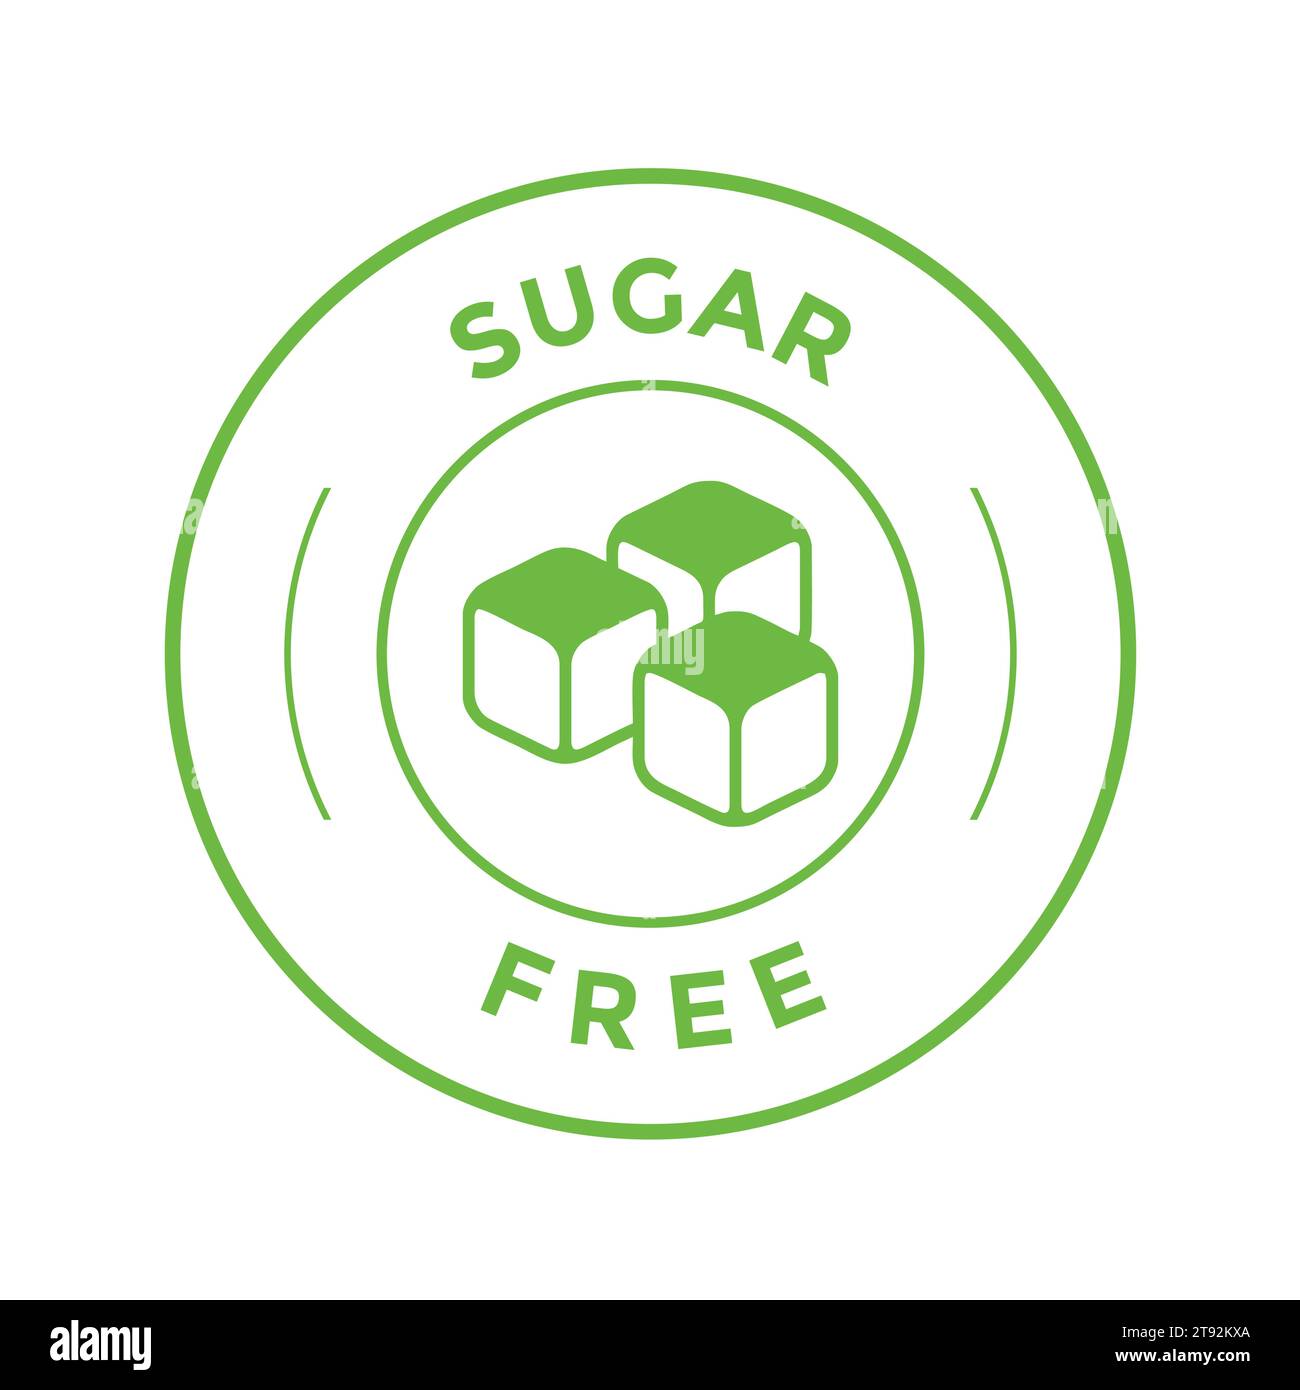 Sugar free label. Vector sugar cubes in circle icon for no sugar added product package design Stock Vector